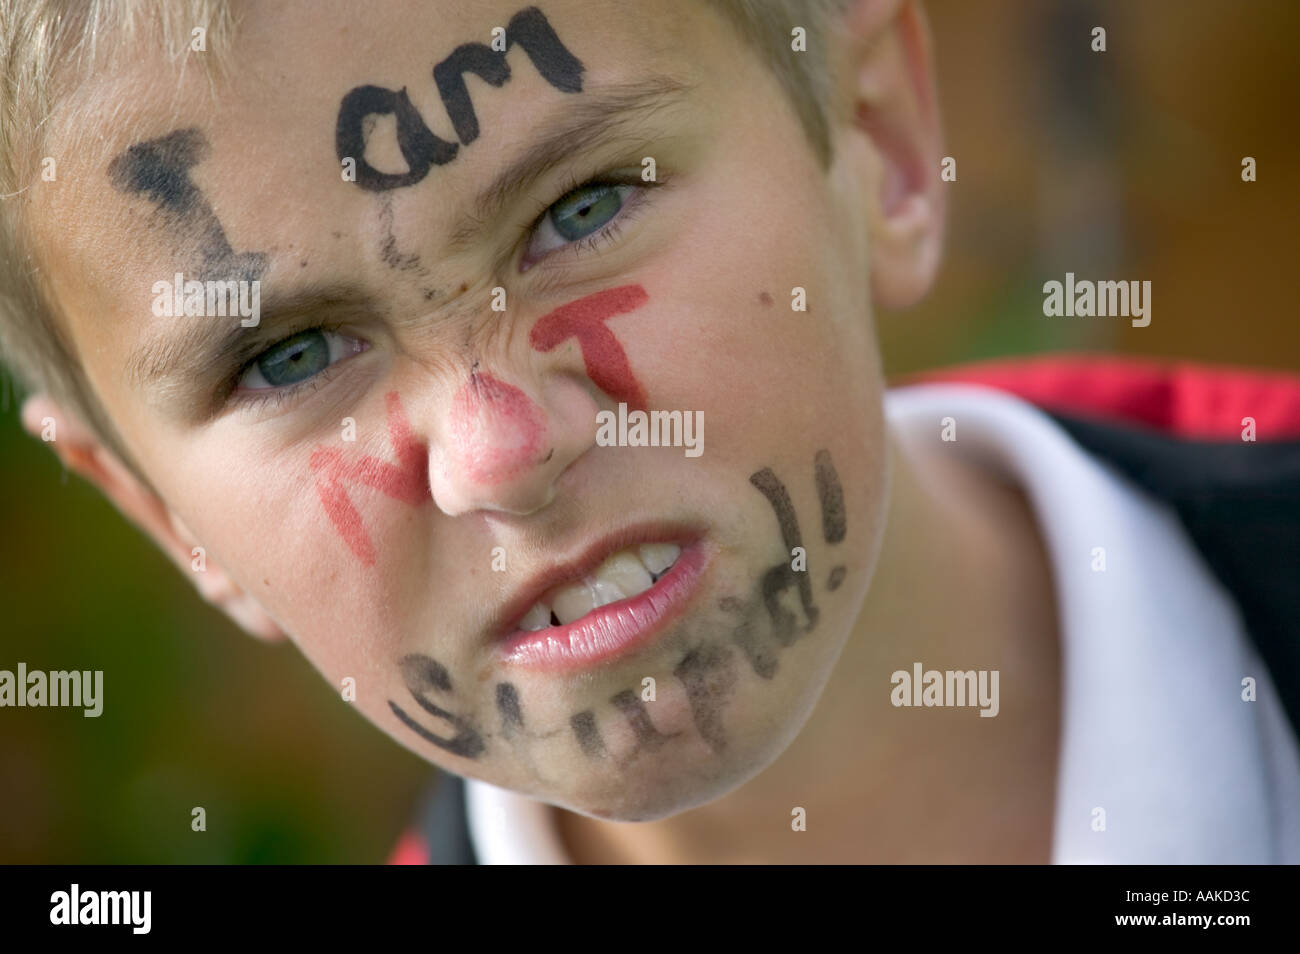 face painting I am not stupid Stock Photo